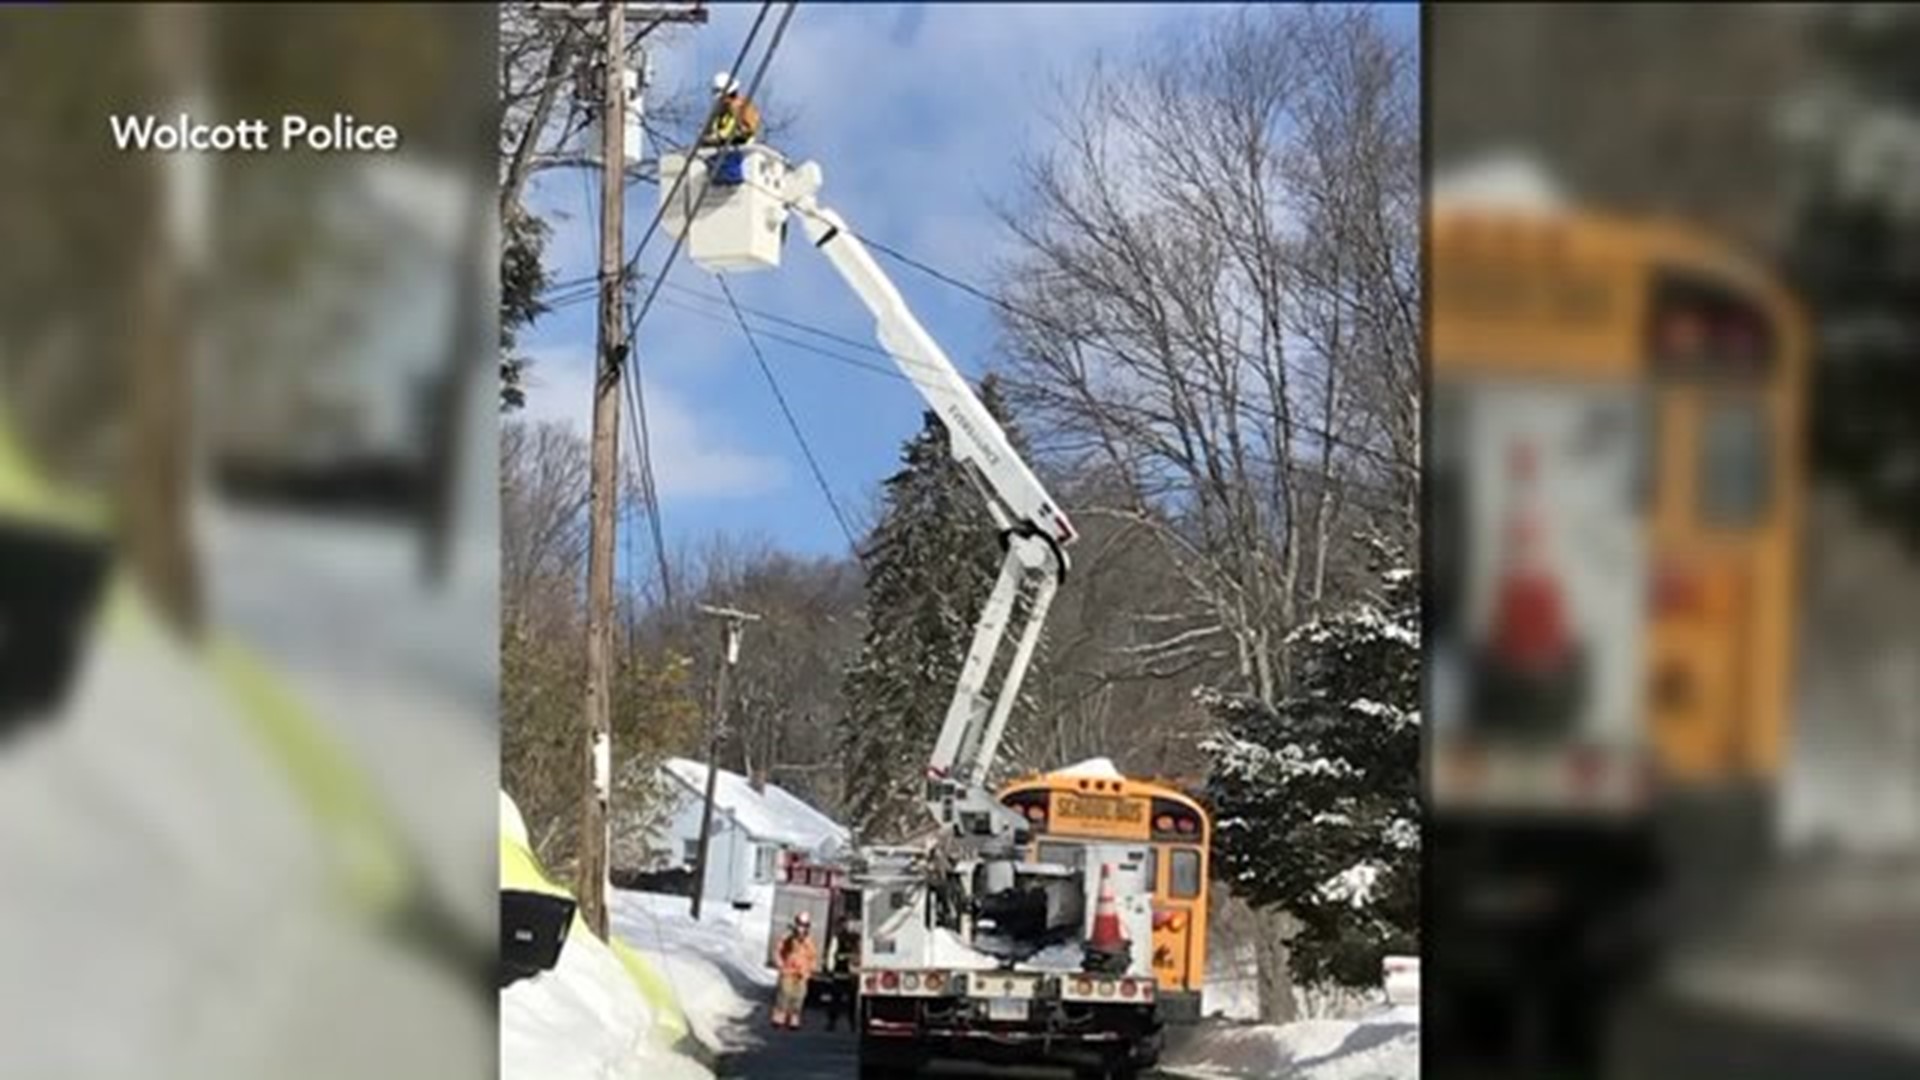 High winds cause wires to fall on Wolcott school bus